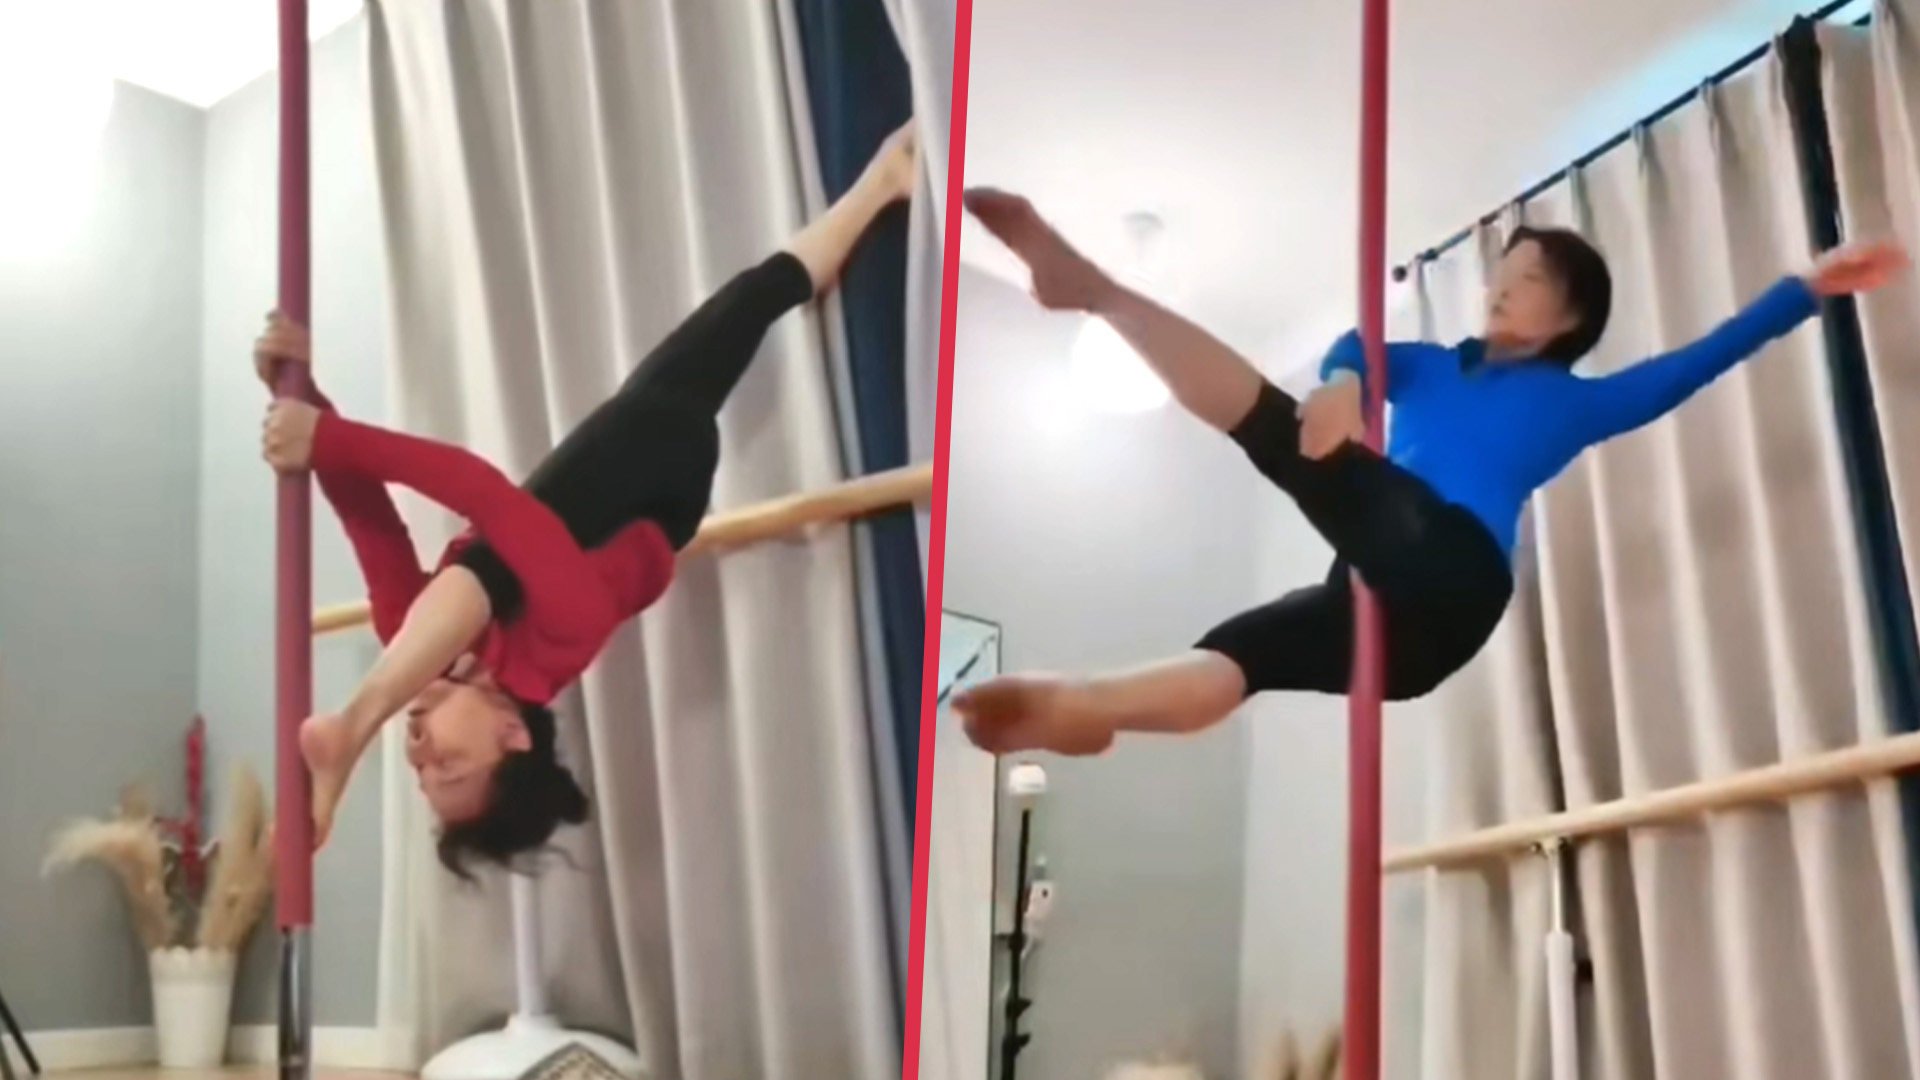 A 78-year-old woman in China has fallen in love with pole dancing following her retirement, becoming a high-profile television personality along the way. Photo: SCMP composite/Douyin